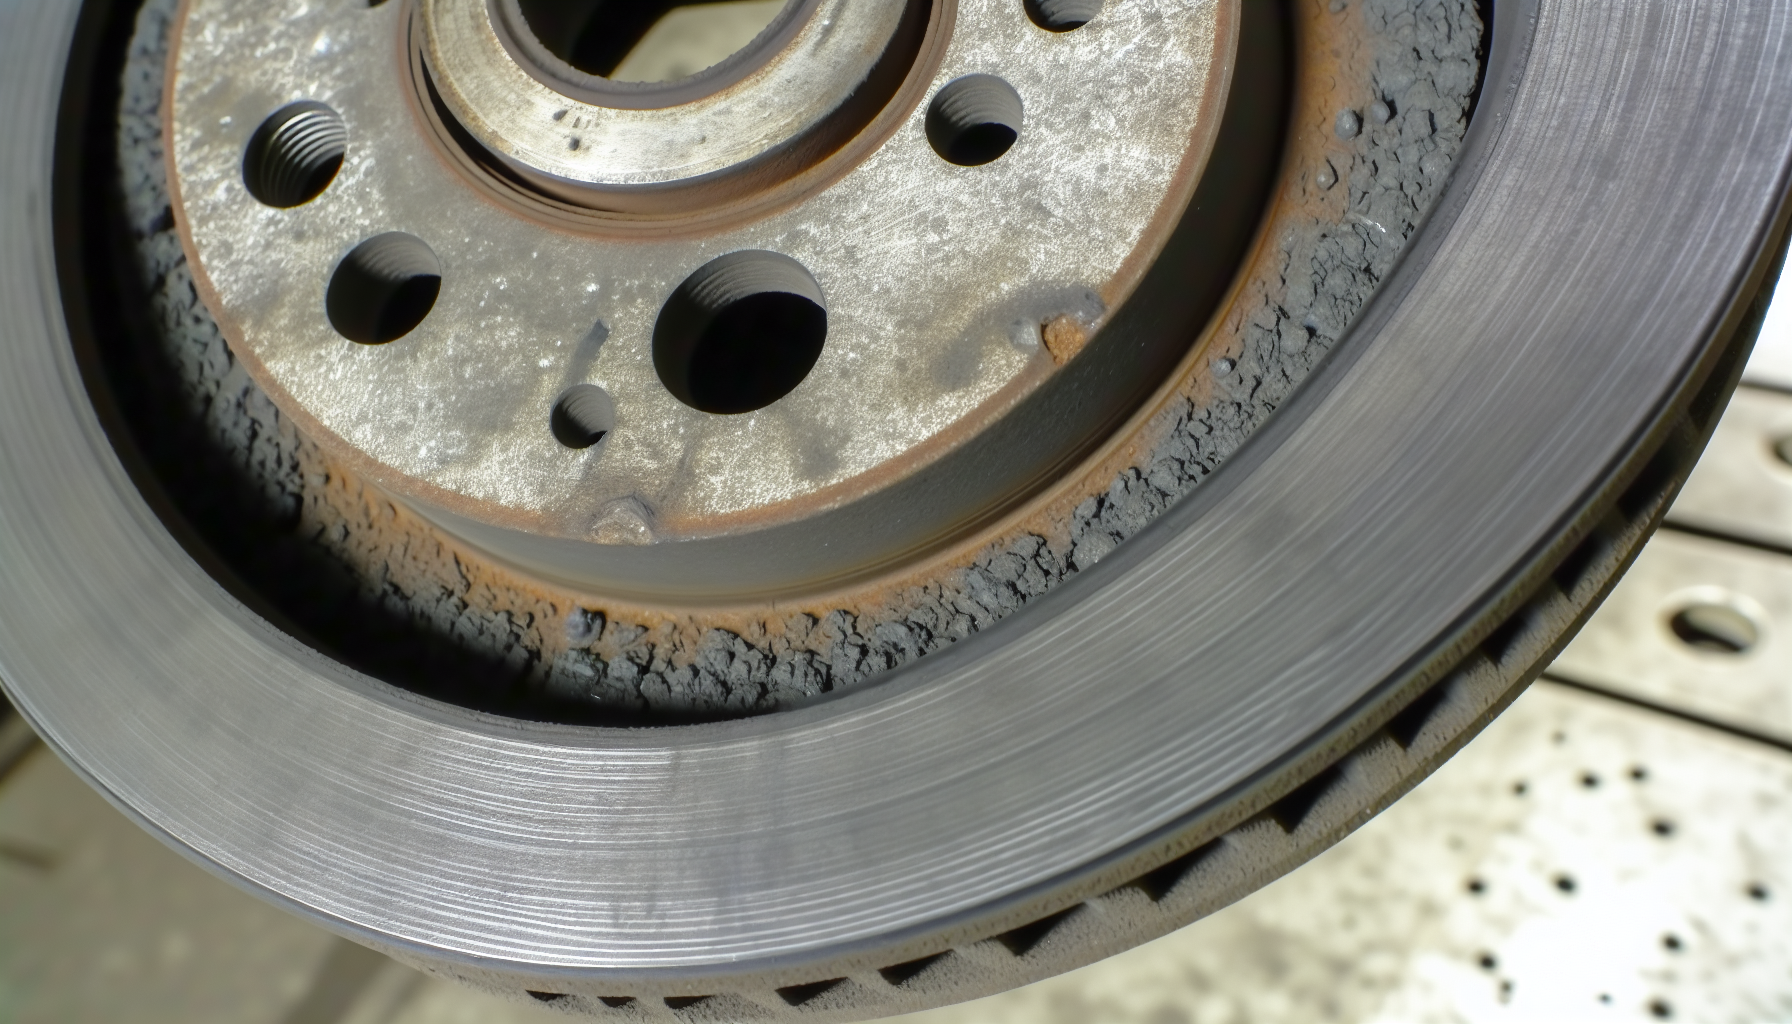 Worn brake rotor with visible grooves and ridges